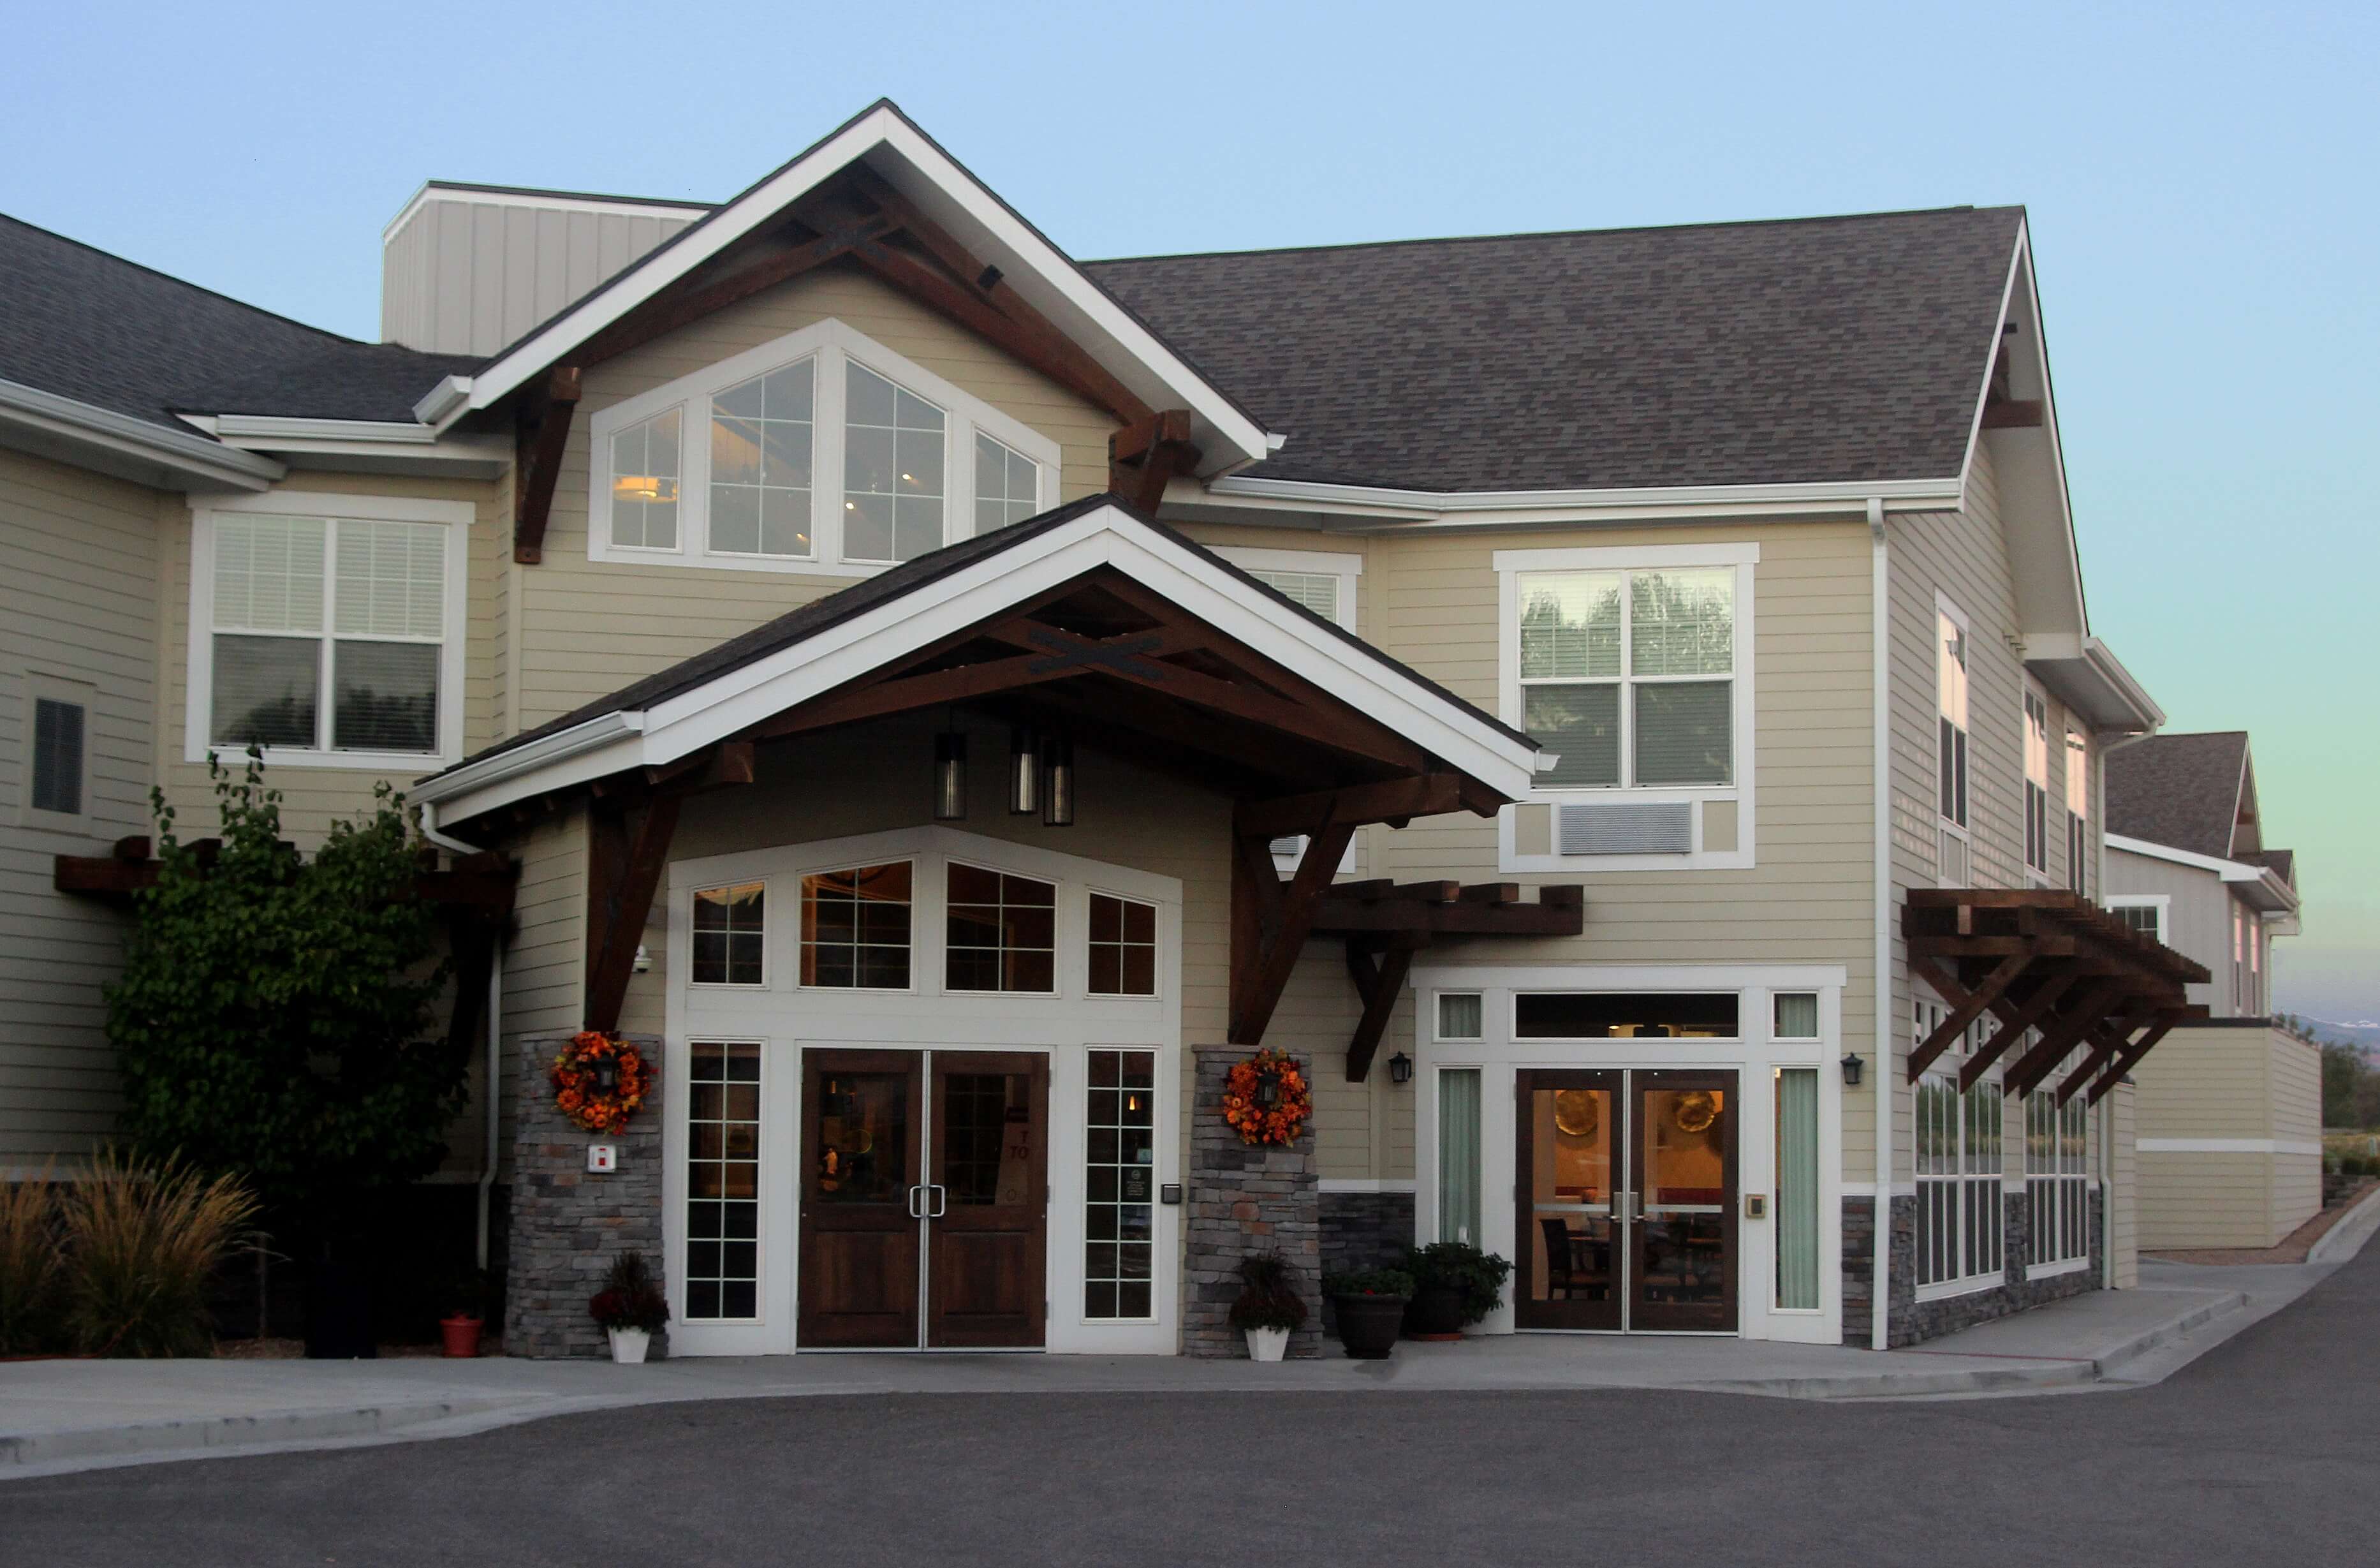 Grand Junction Assisted Living Community Entrance